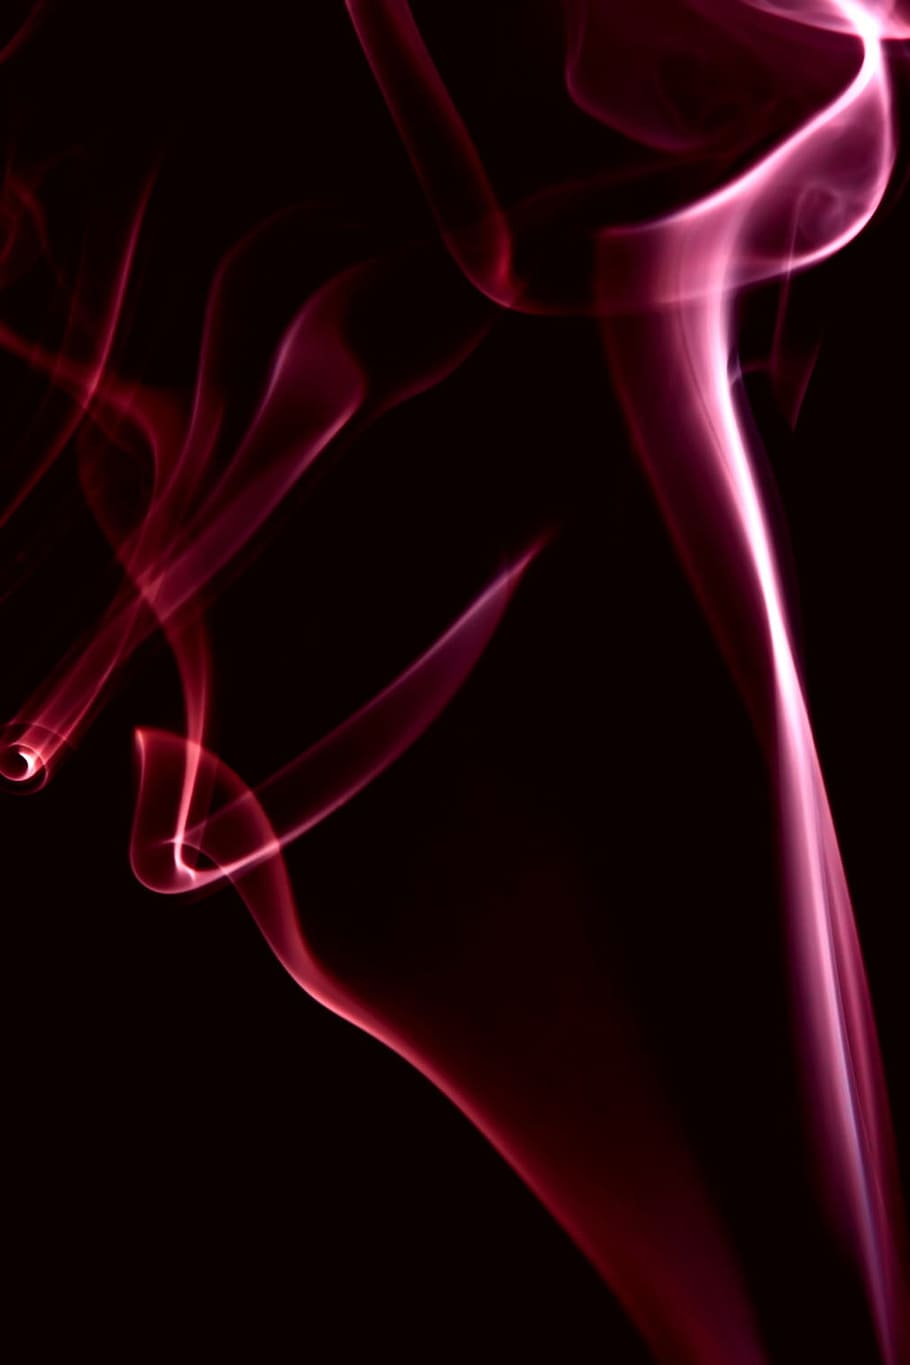 red, background, smoke, isolated, black, smooth, shape, abstract, wave, scented